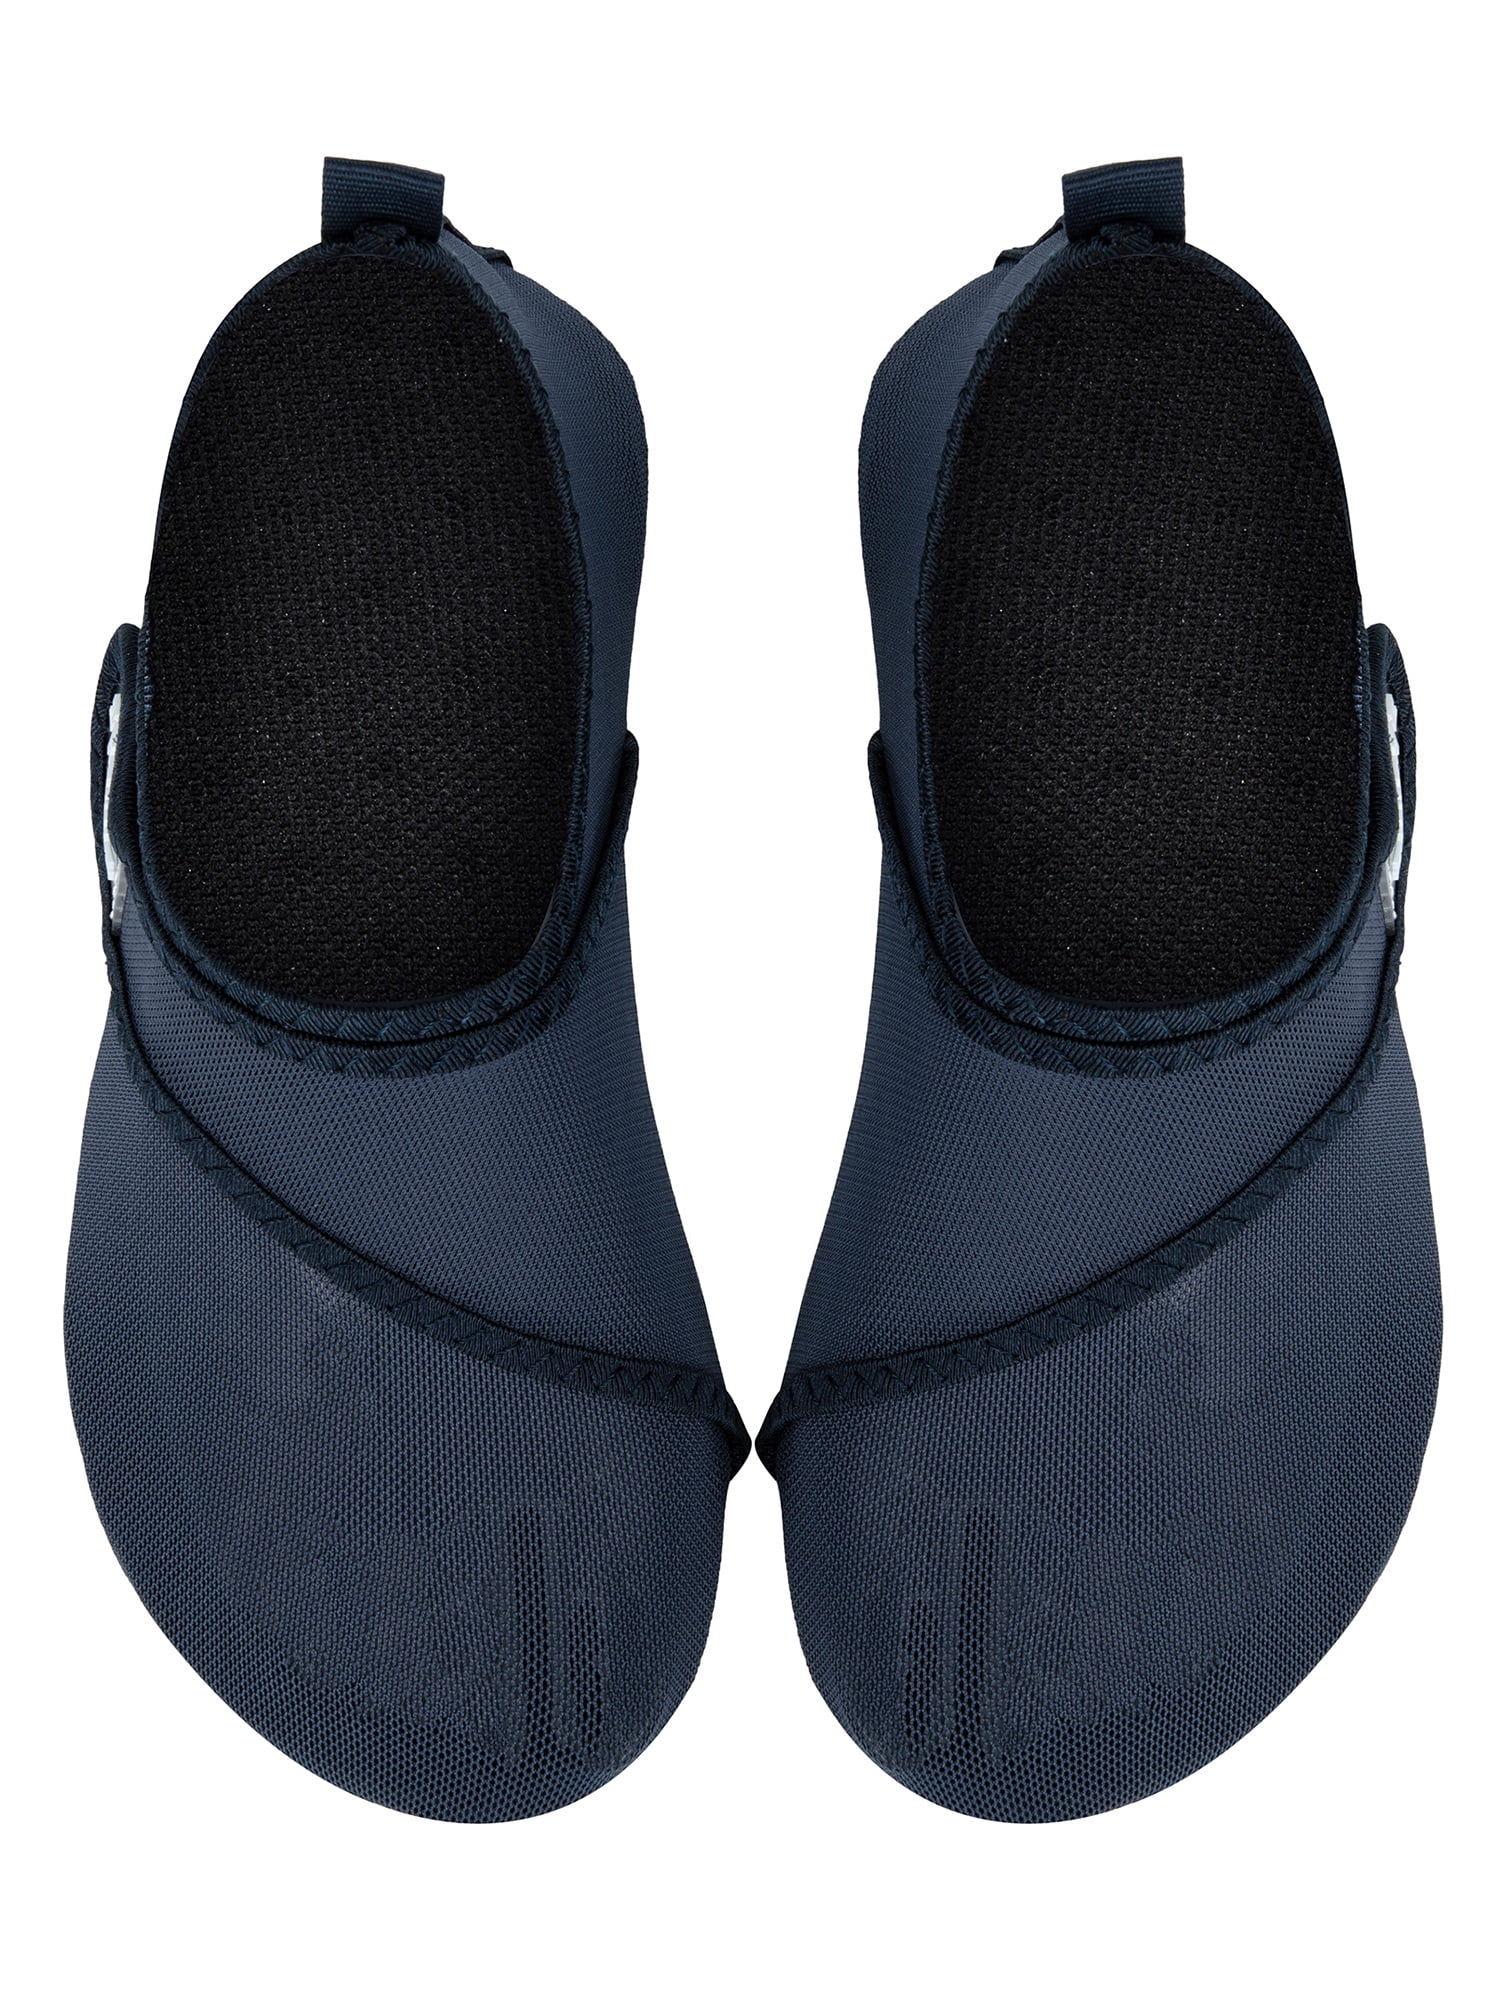 barefoot skin shoes